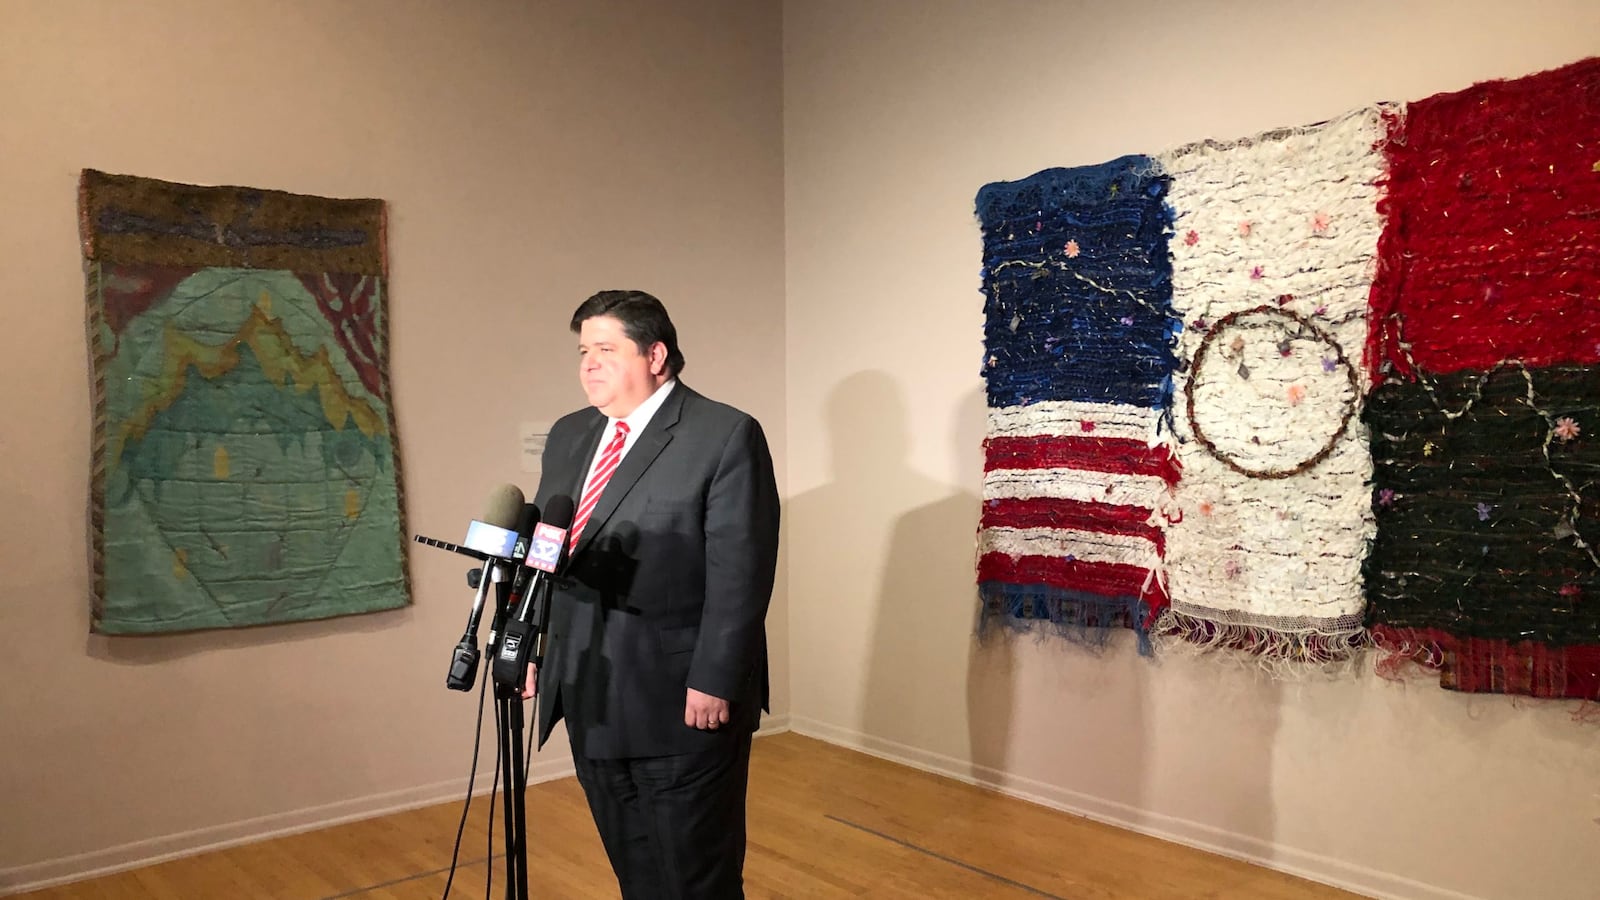 Gov. J.B. Pritzker announced the next phase of his early education agenda Jan. 21 at the National Museum of Mexican Art in Pilsen.